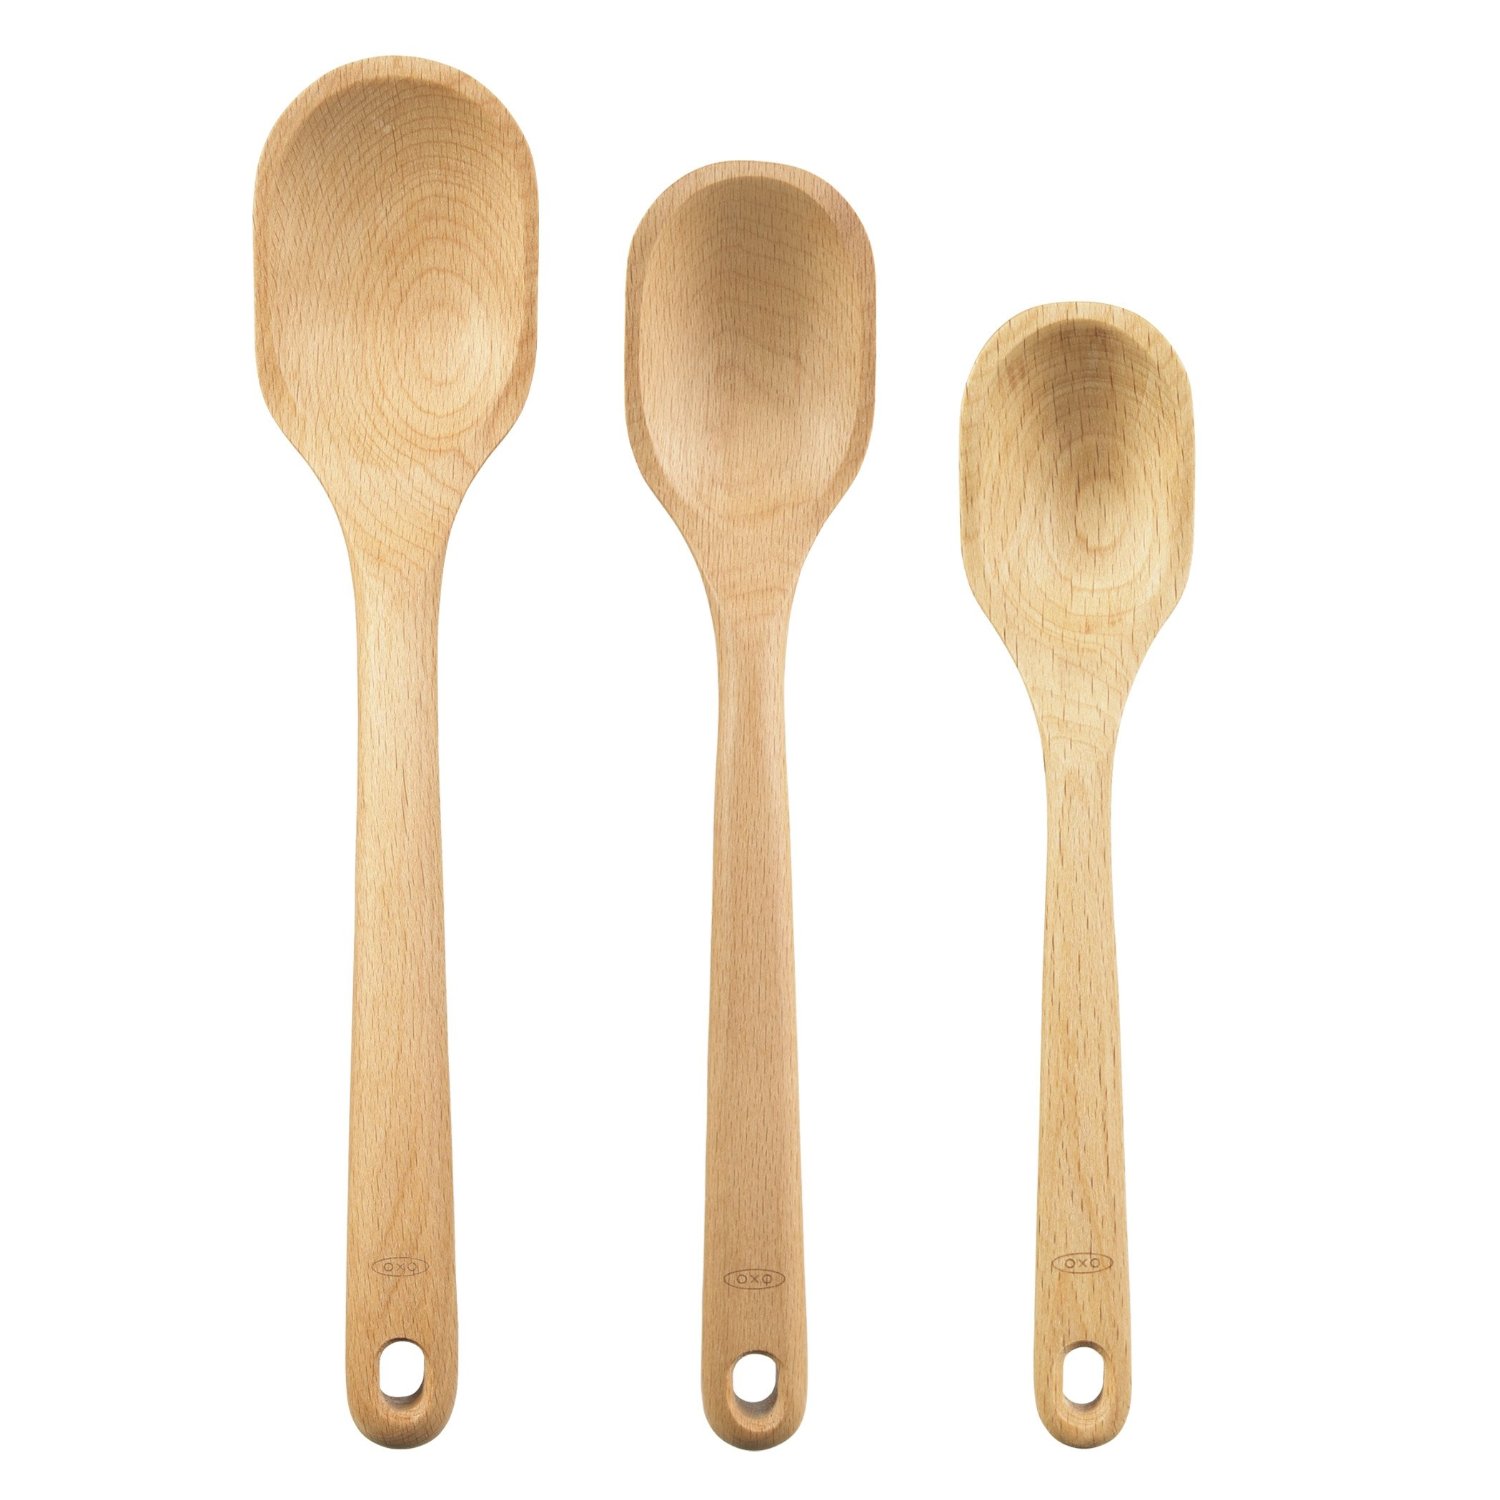 Wooden Spoon Drawing at GetDrawings Free download